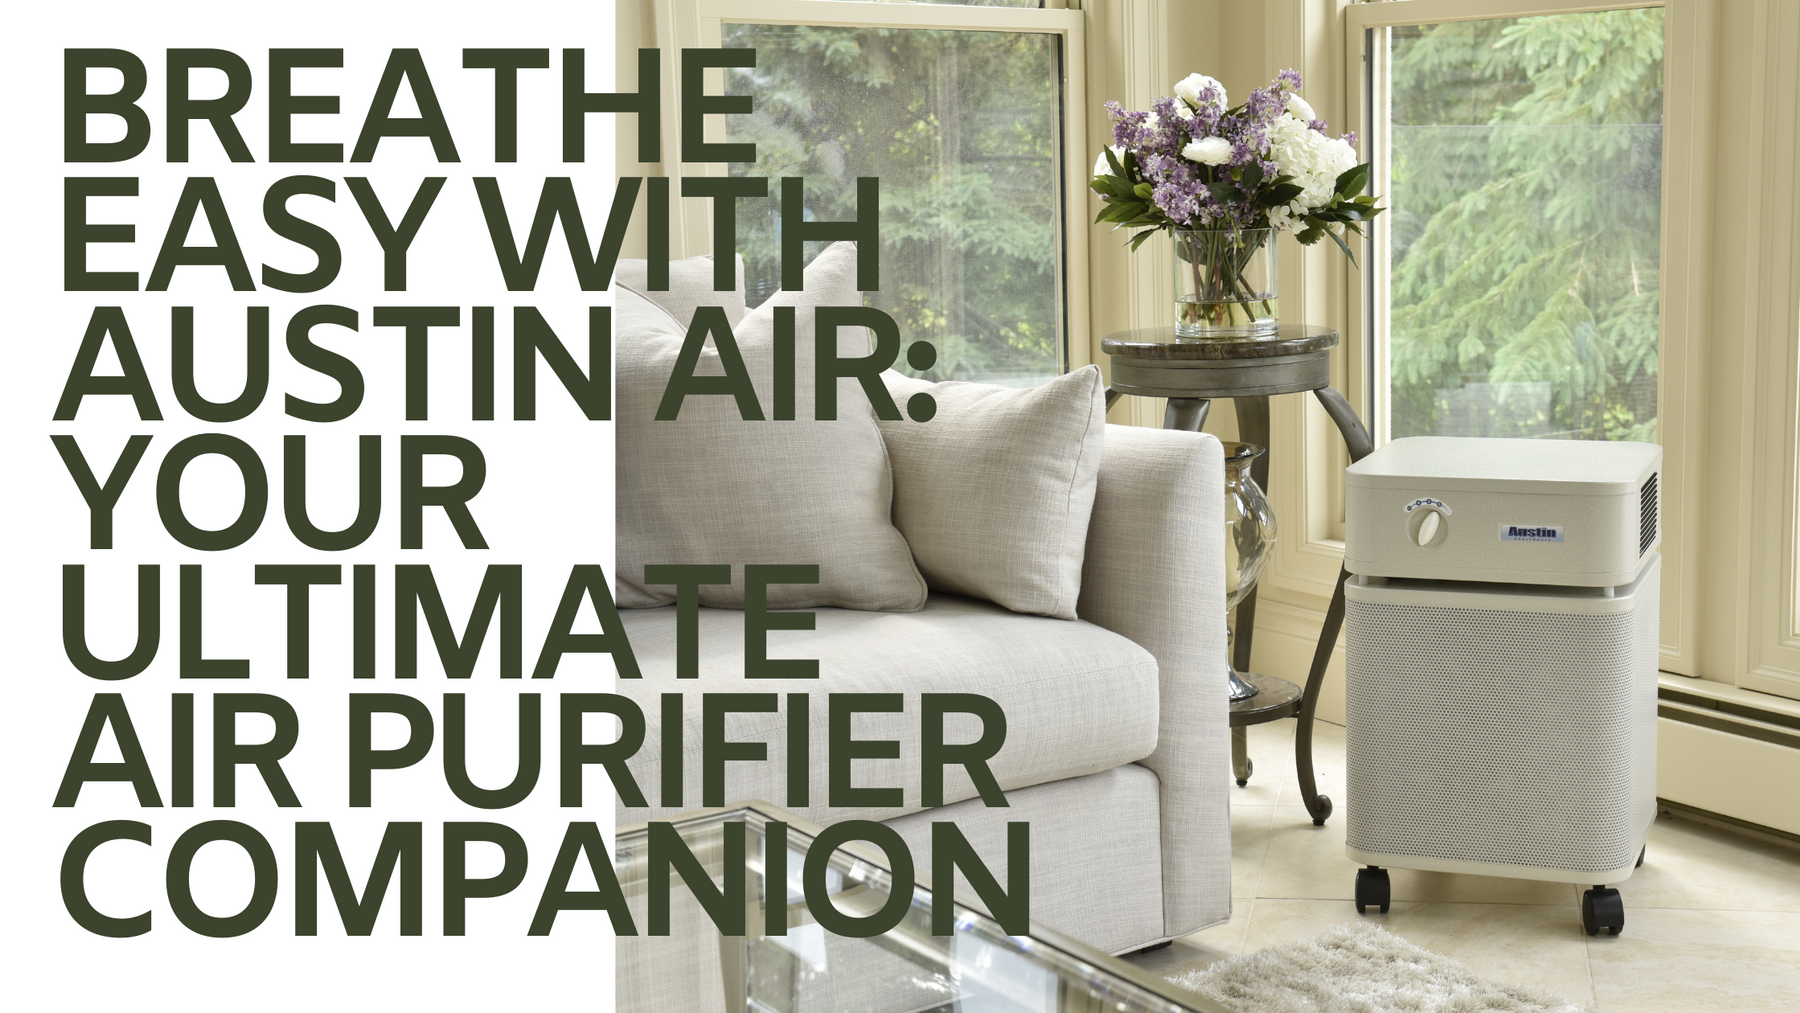 Breathe Easy with Austin Air: Your Ultimate Air Purifier Companion